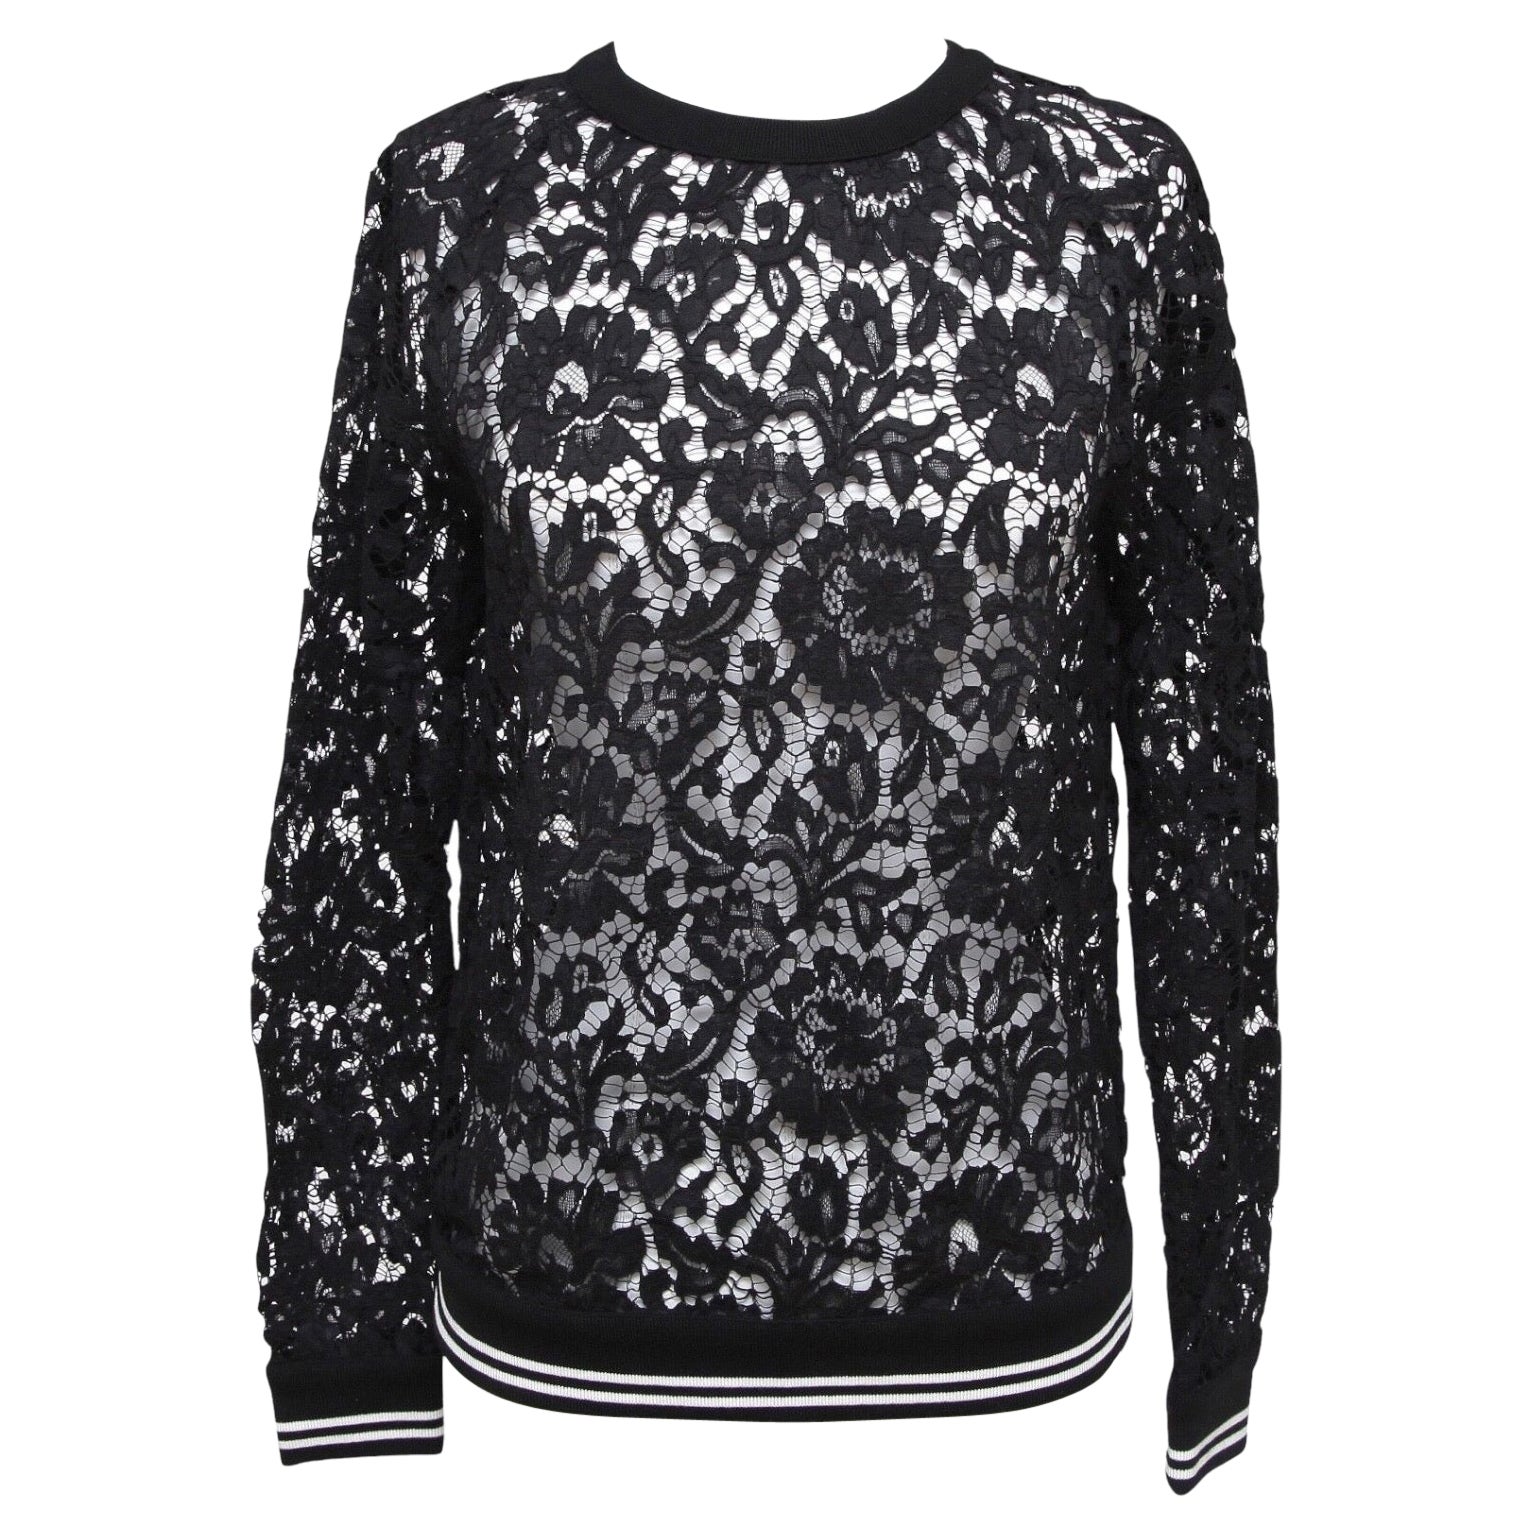 VALENTINO Floral Lace Blouse Top Shirt Long Sleeve Black White Sz S BNWT